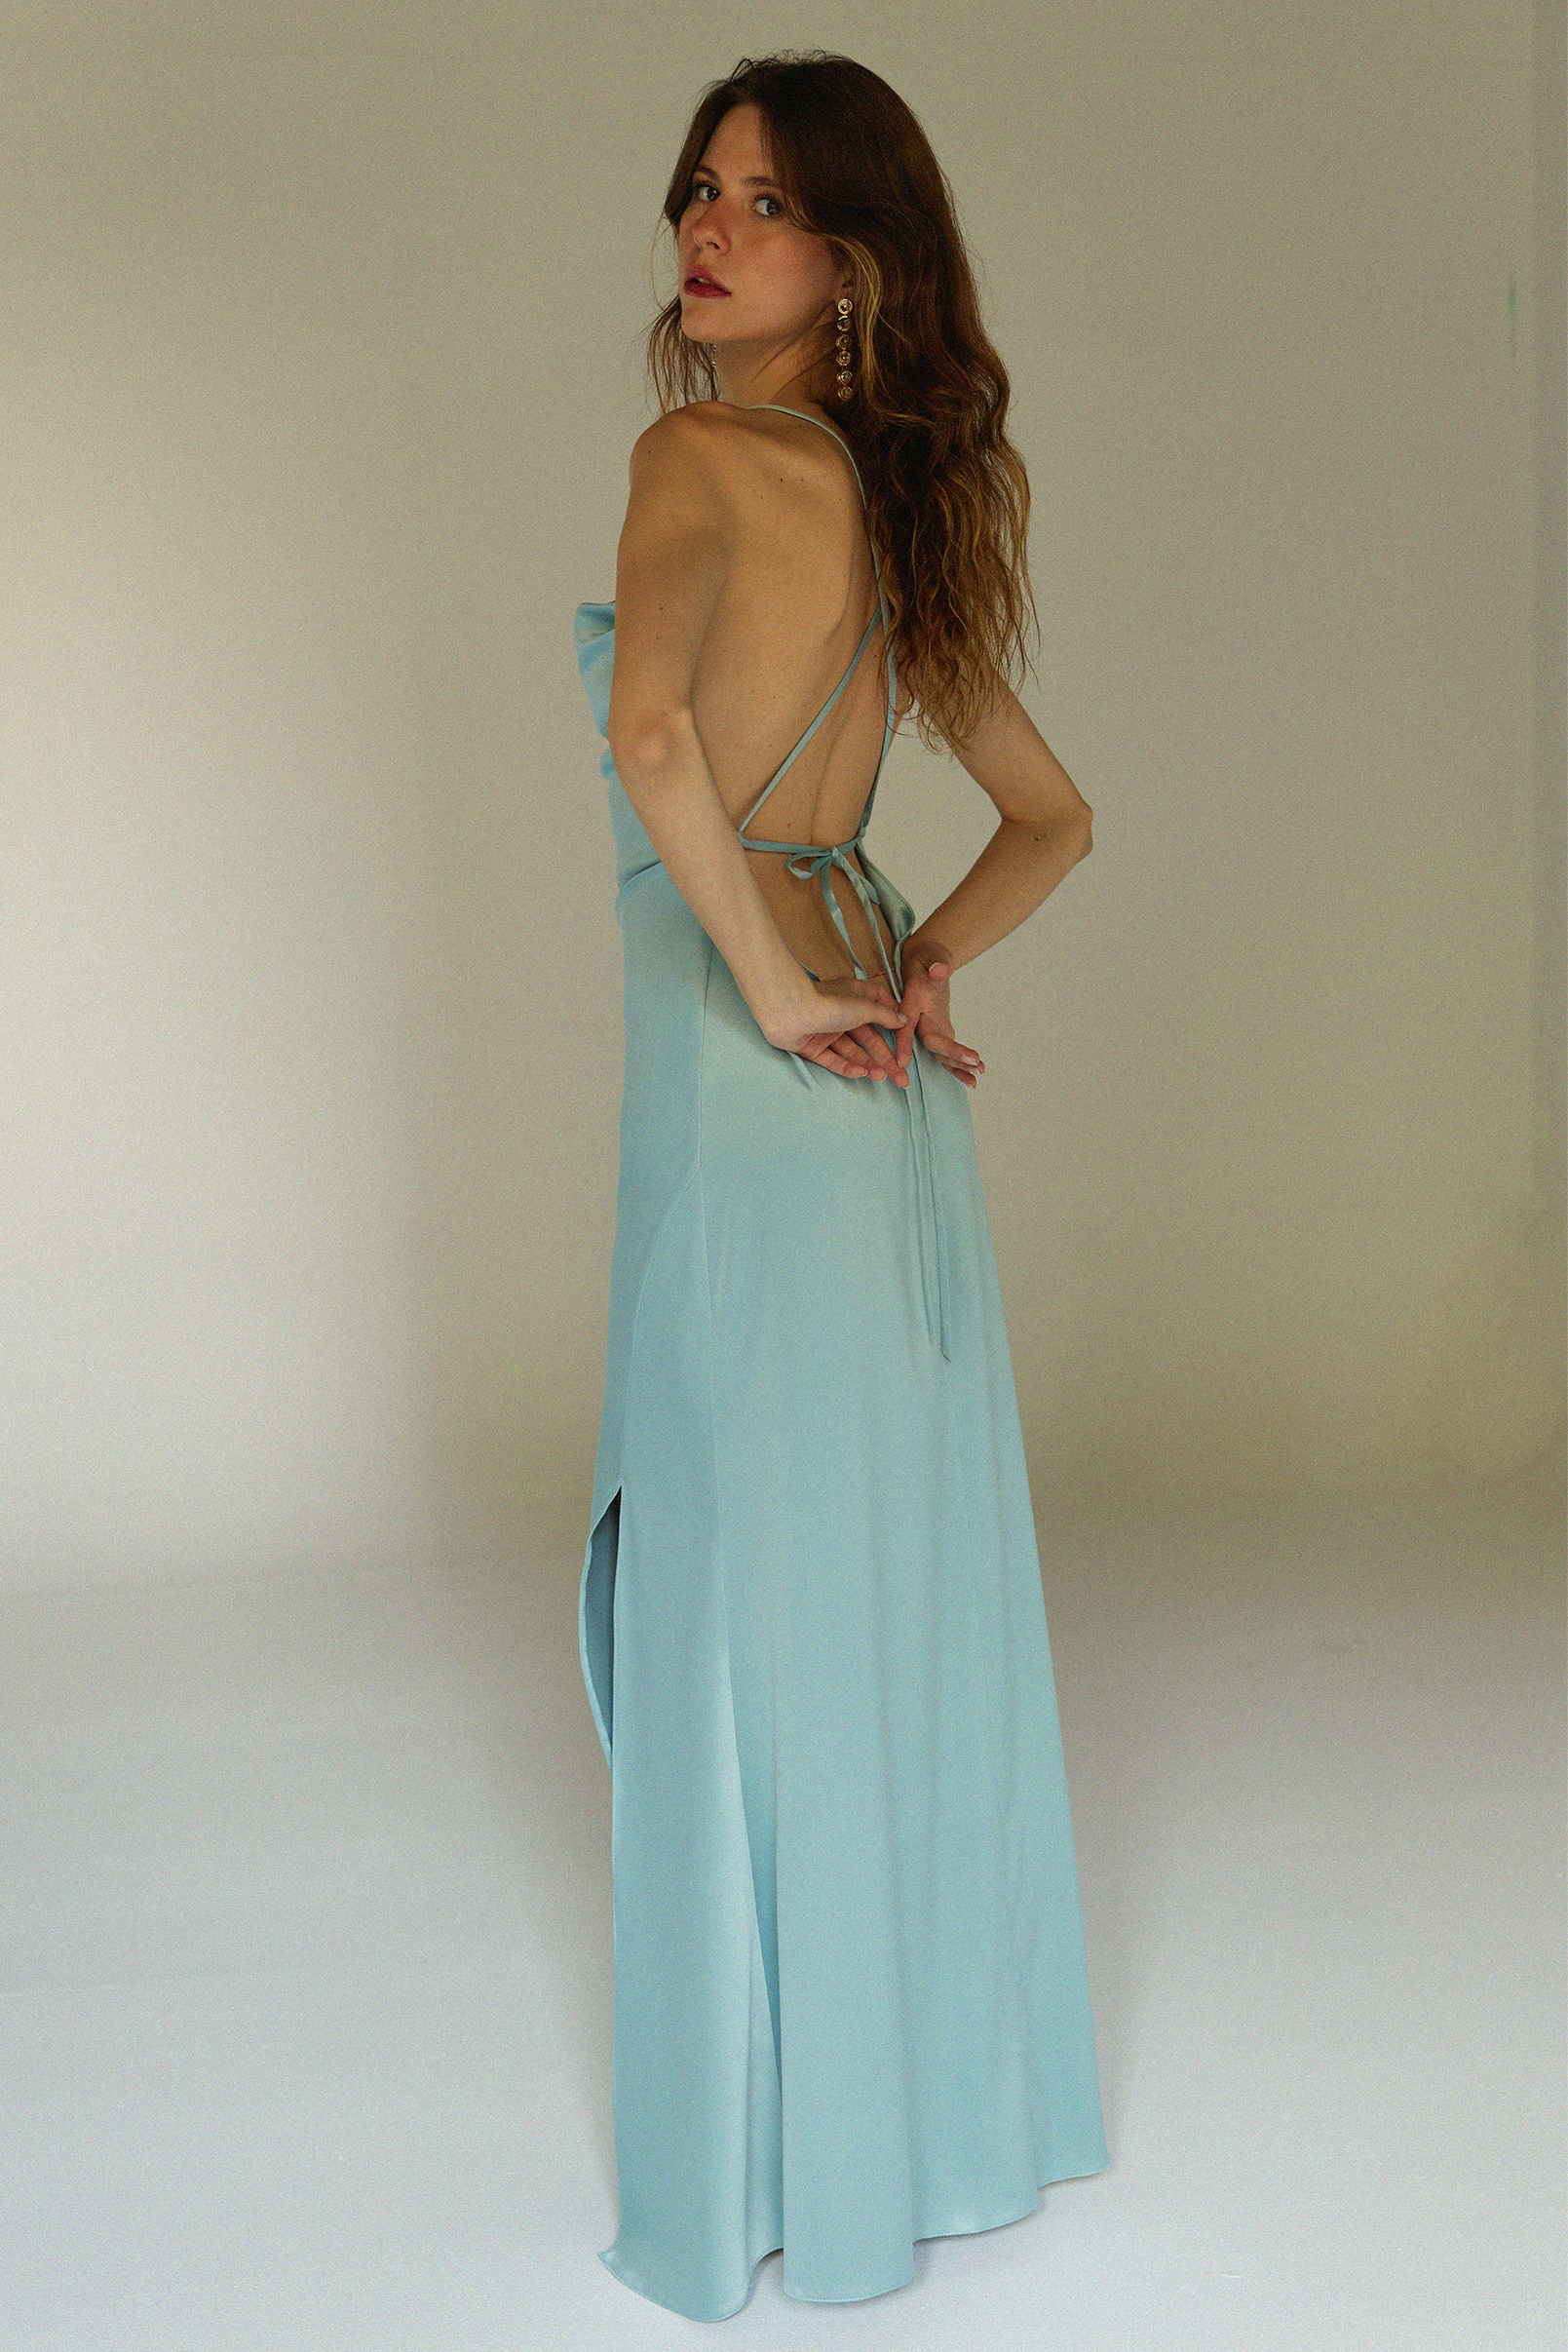 The Backless Satin in Mint